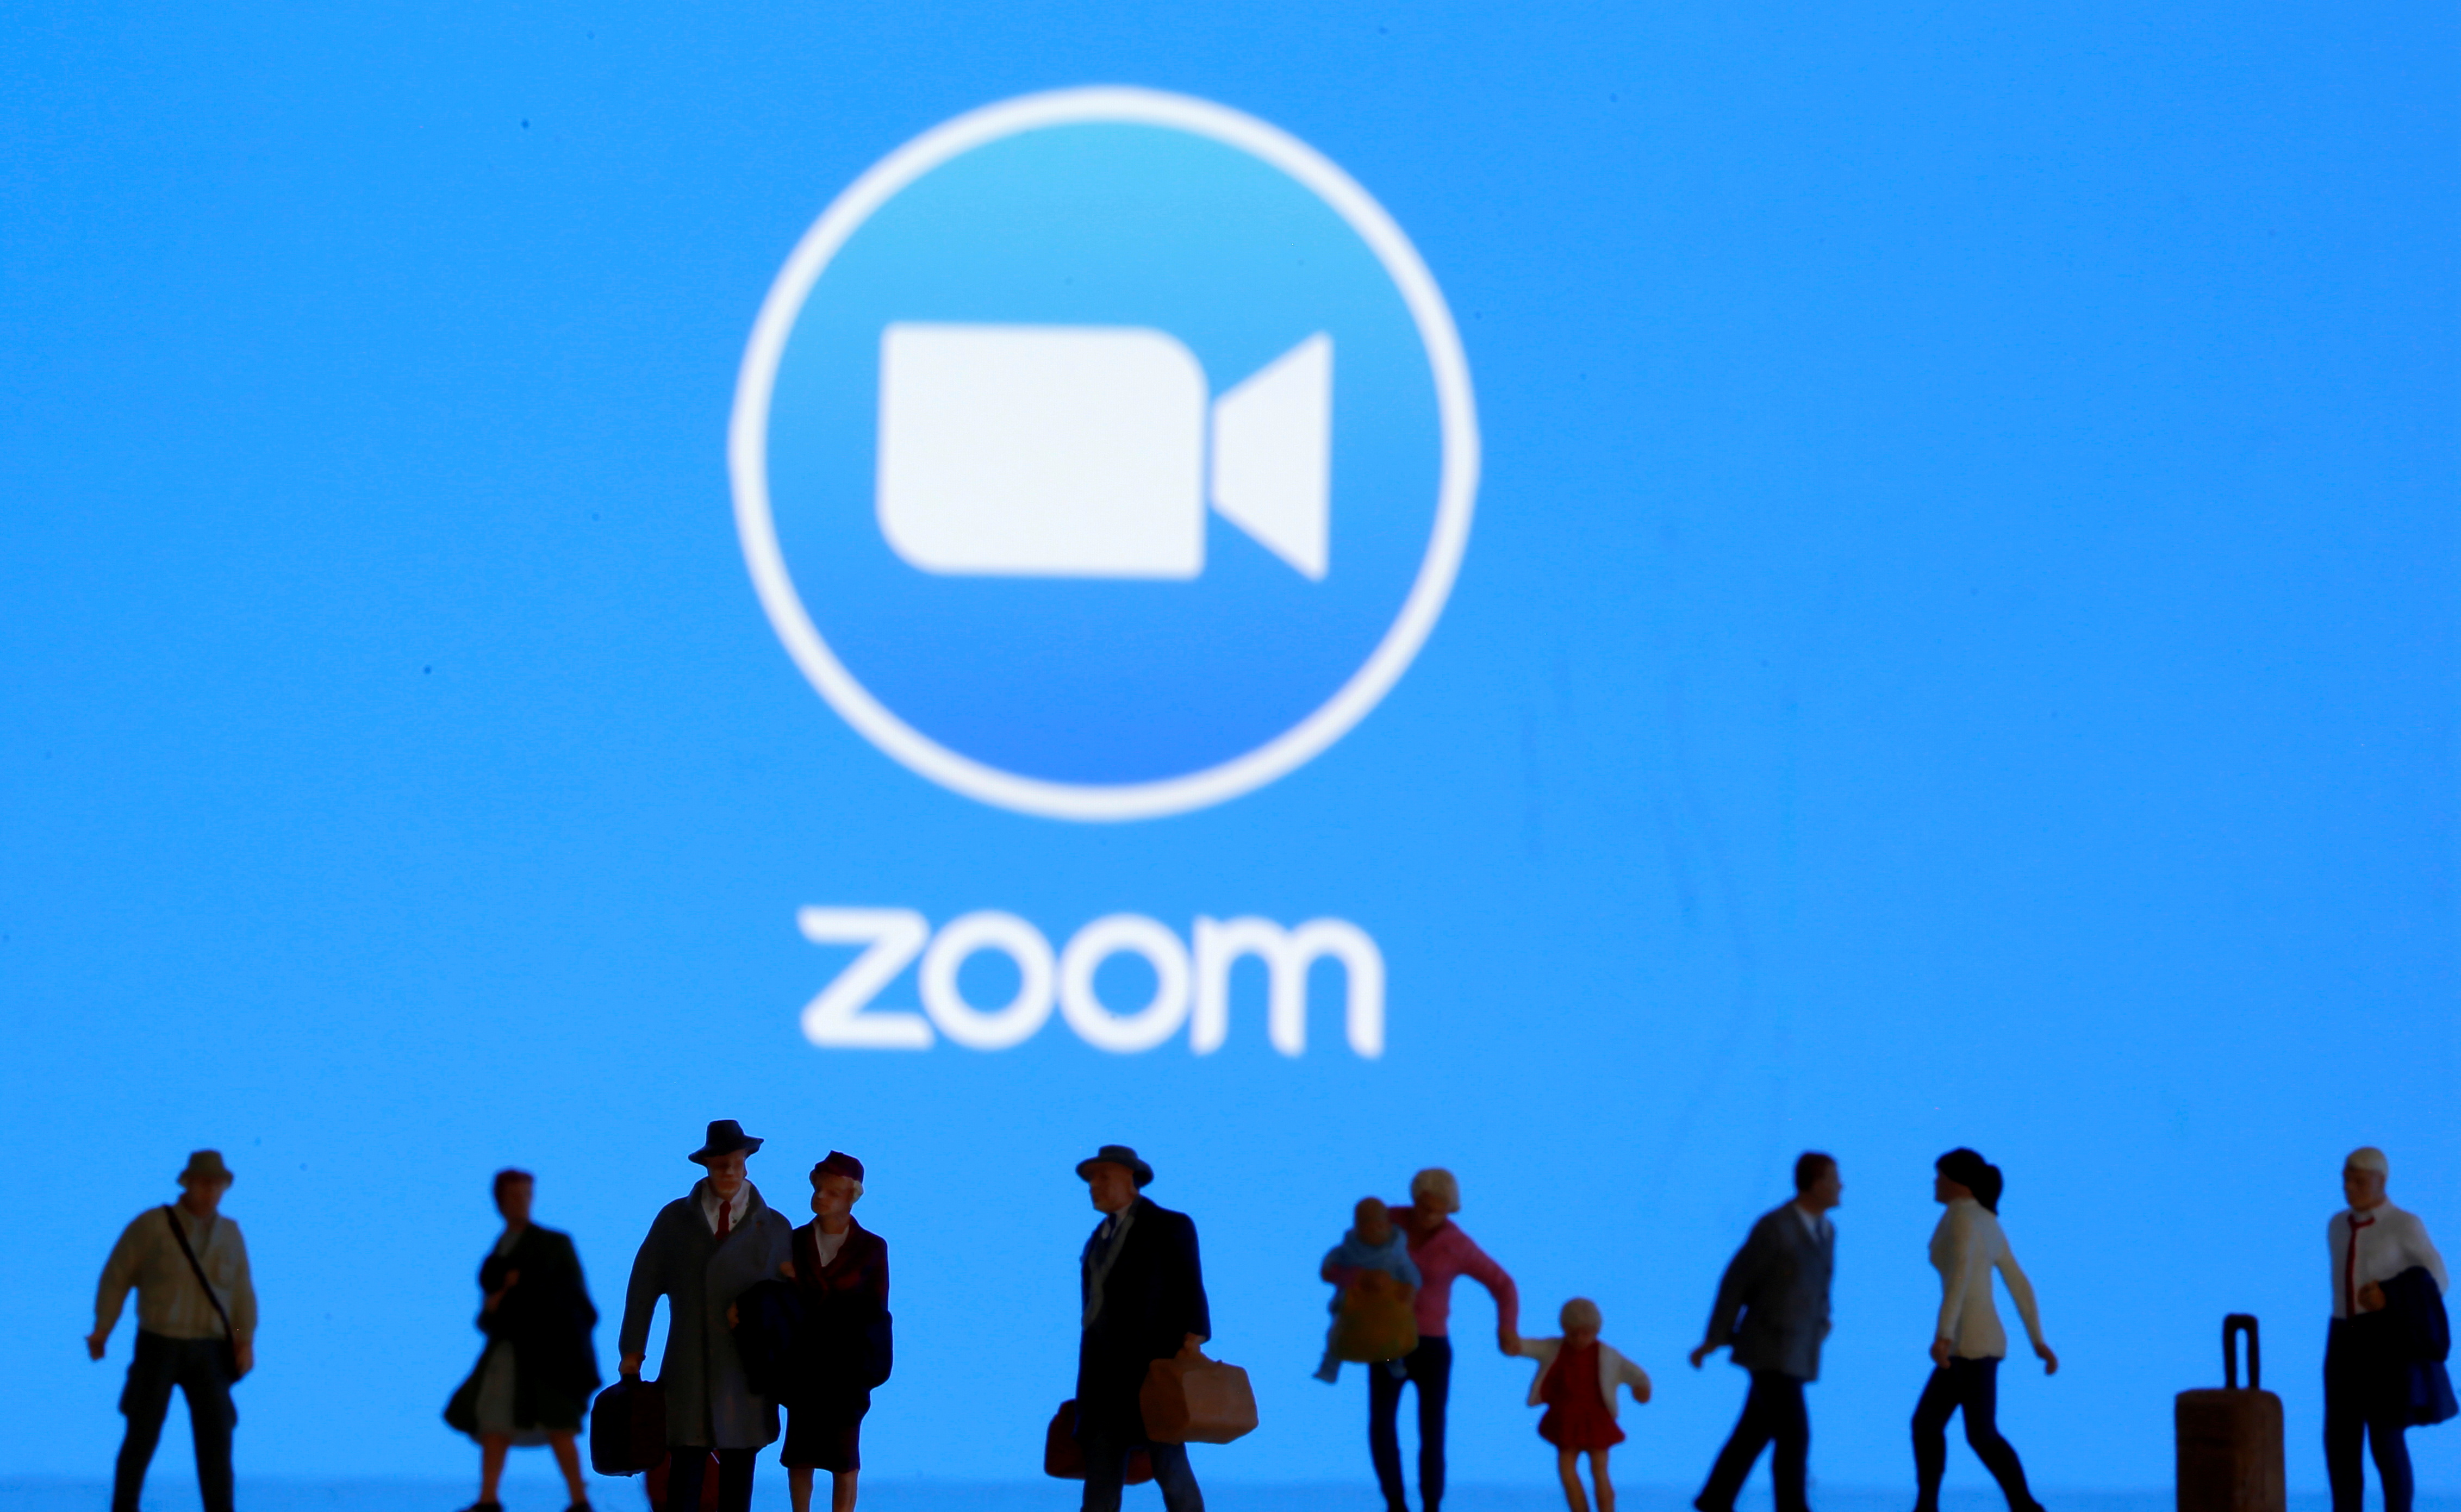 Small toy figures are seen in front of diplayed Zoom logo in this illustration taken March 19, 2020. REUTERS/Dado Ruvic/Illustration